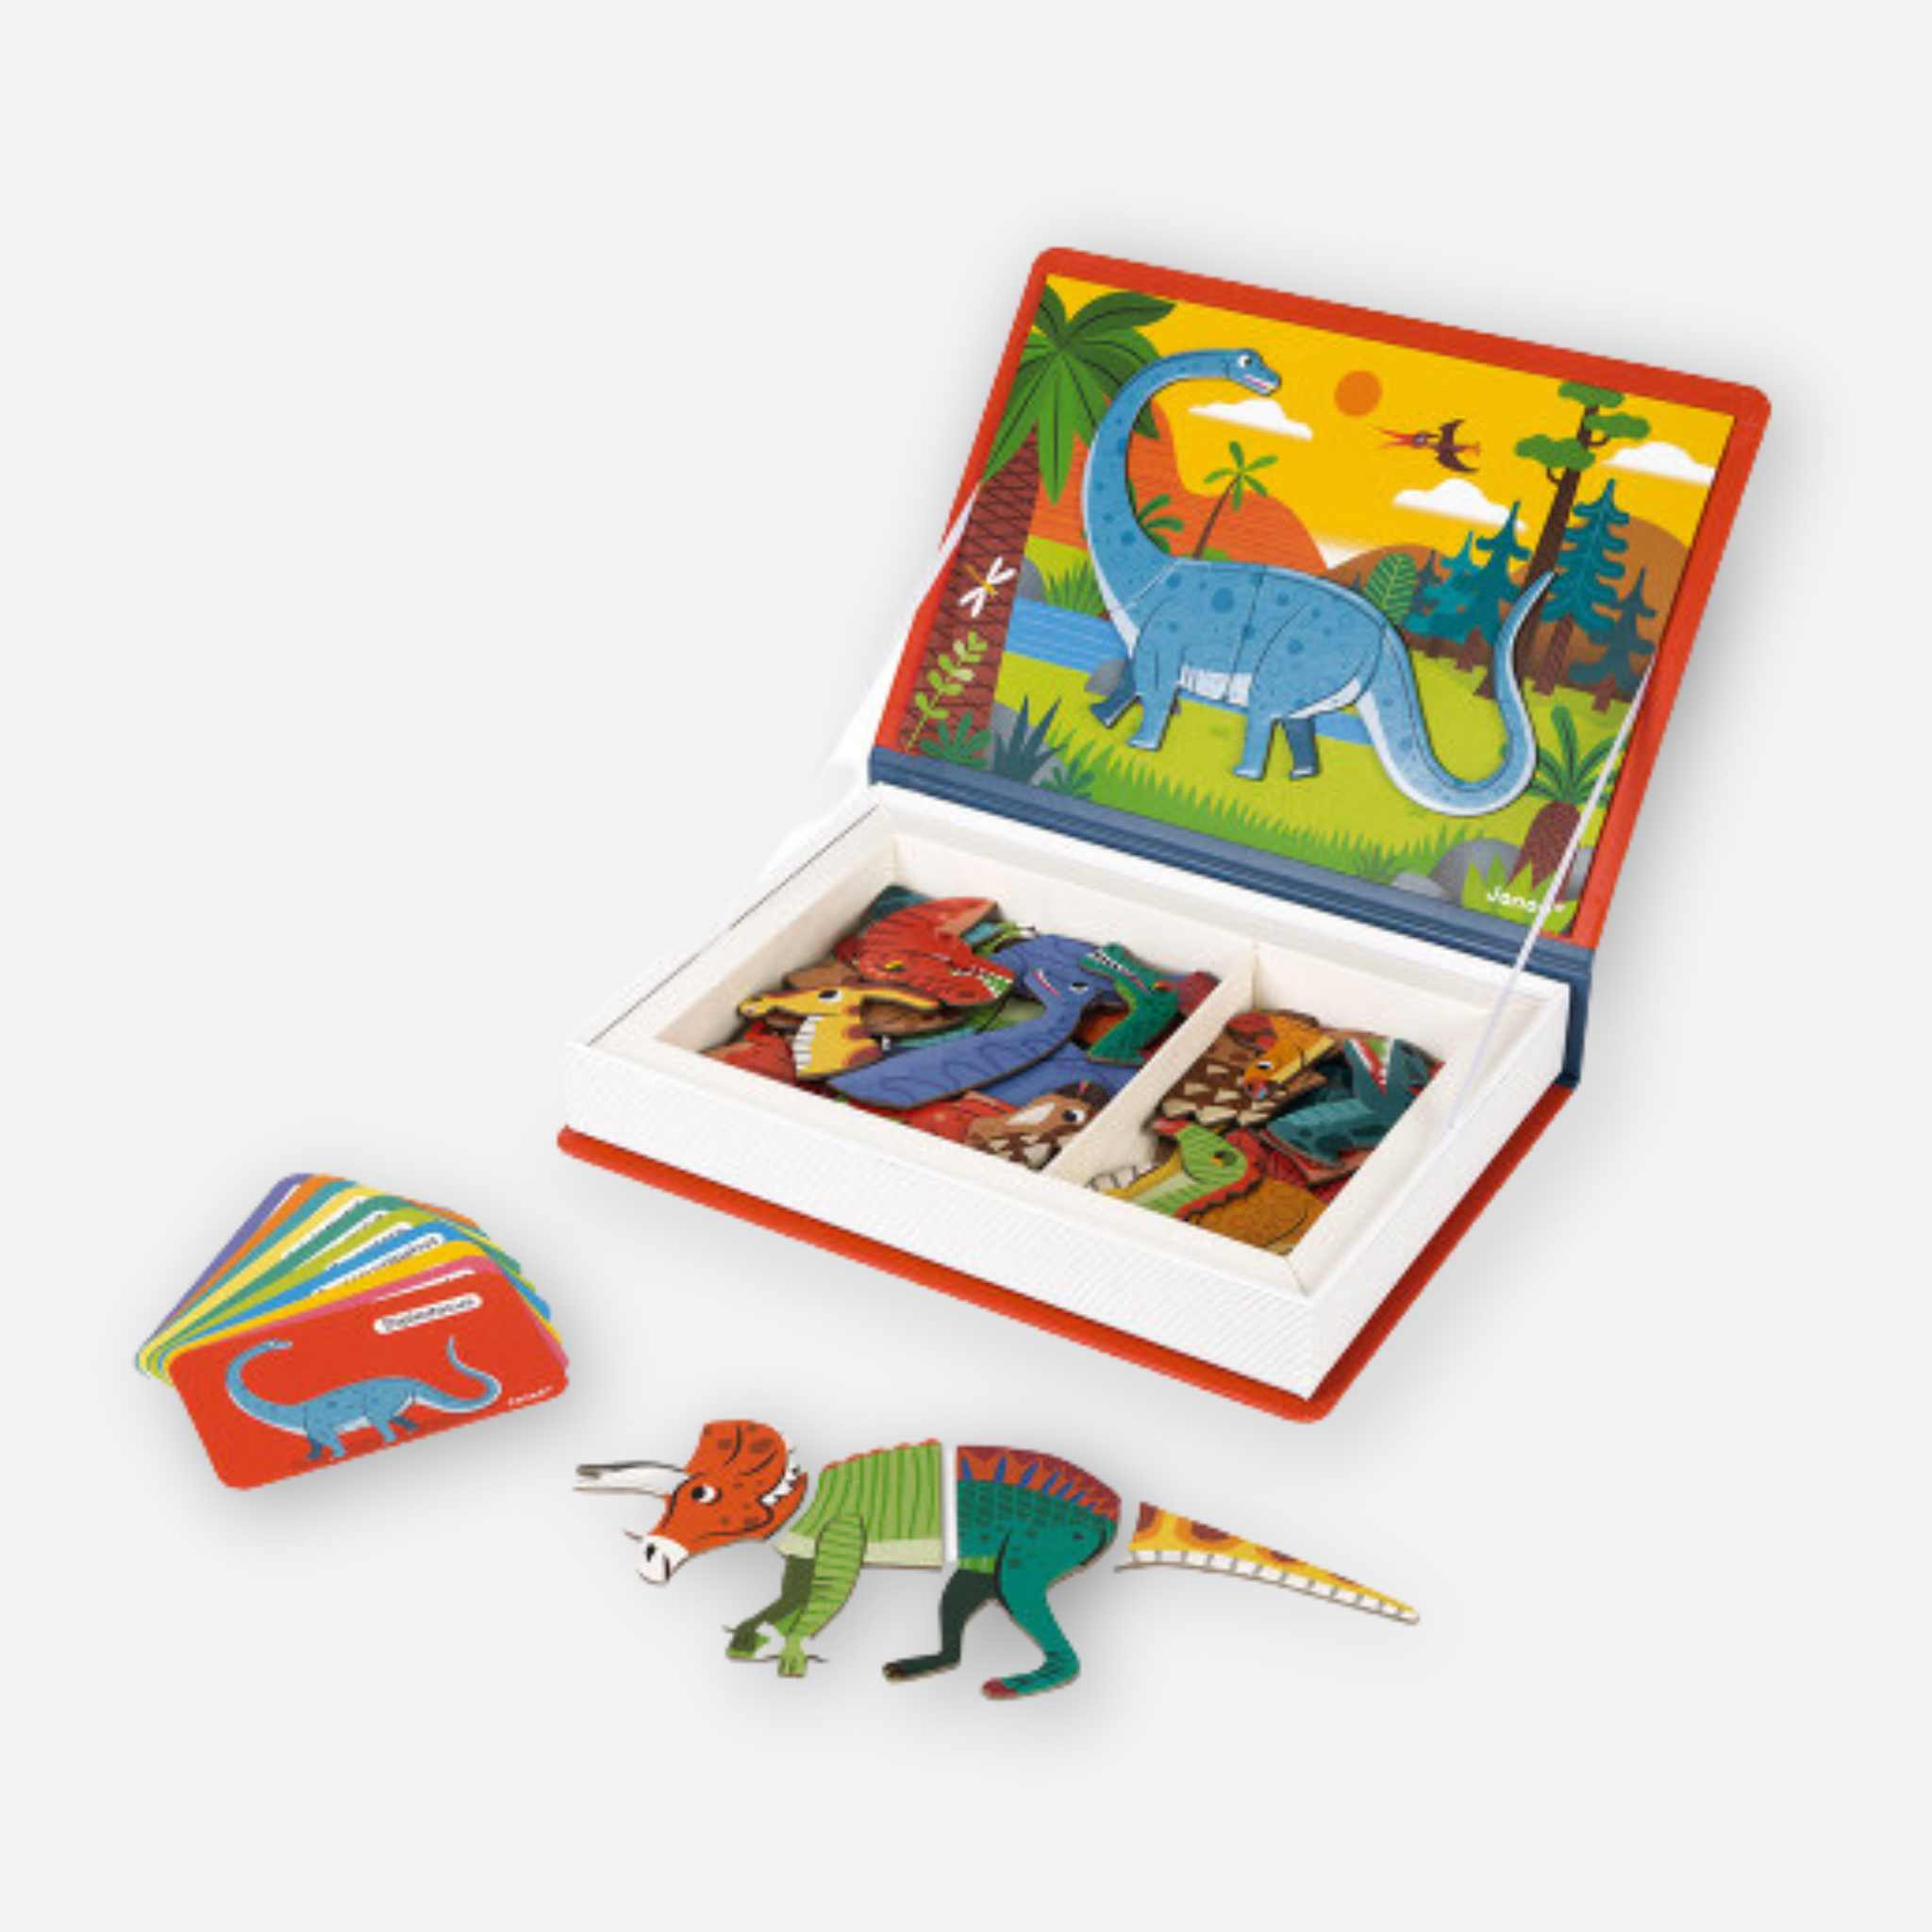 Explore Prehistoric Times with Janod's Dinosaurs Magneti Book